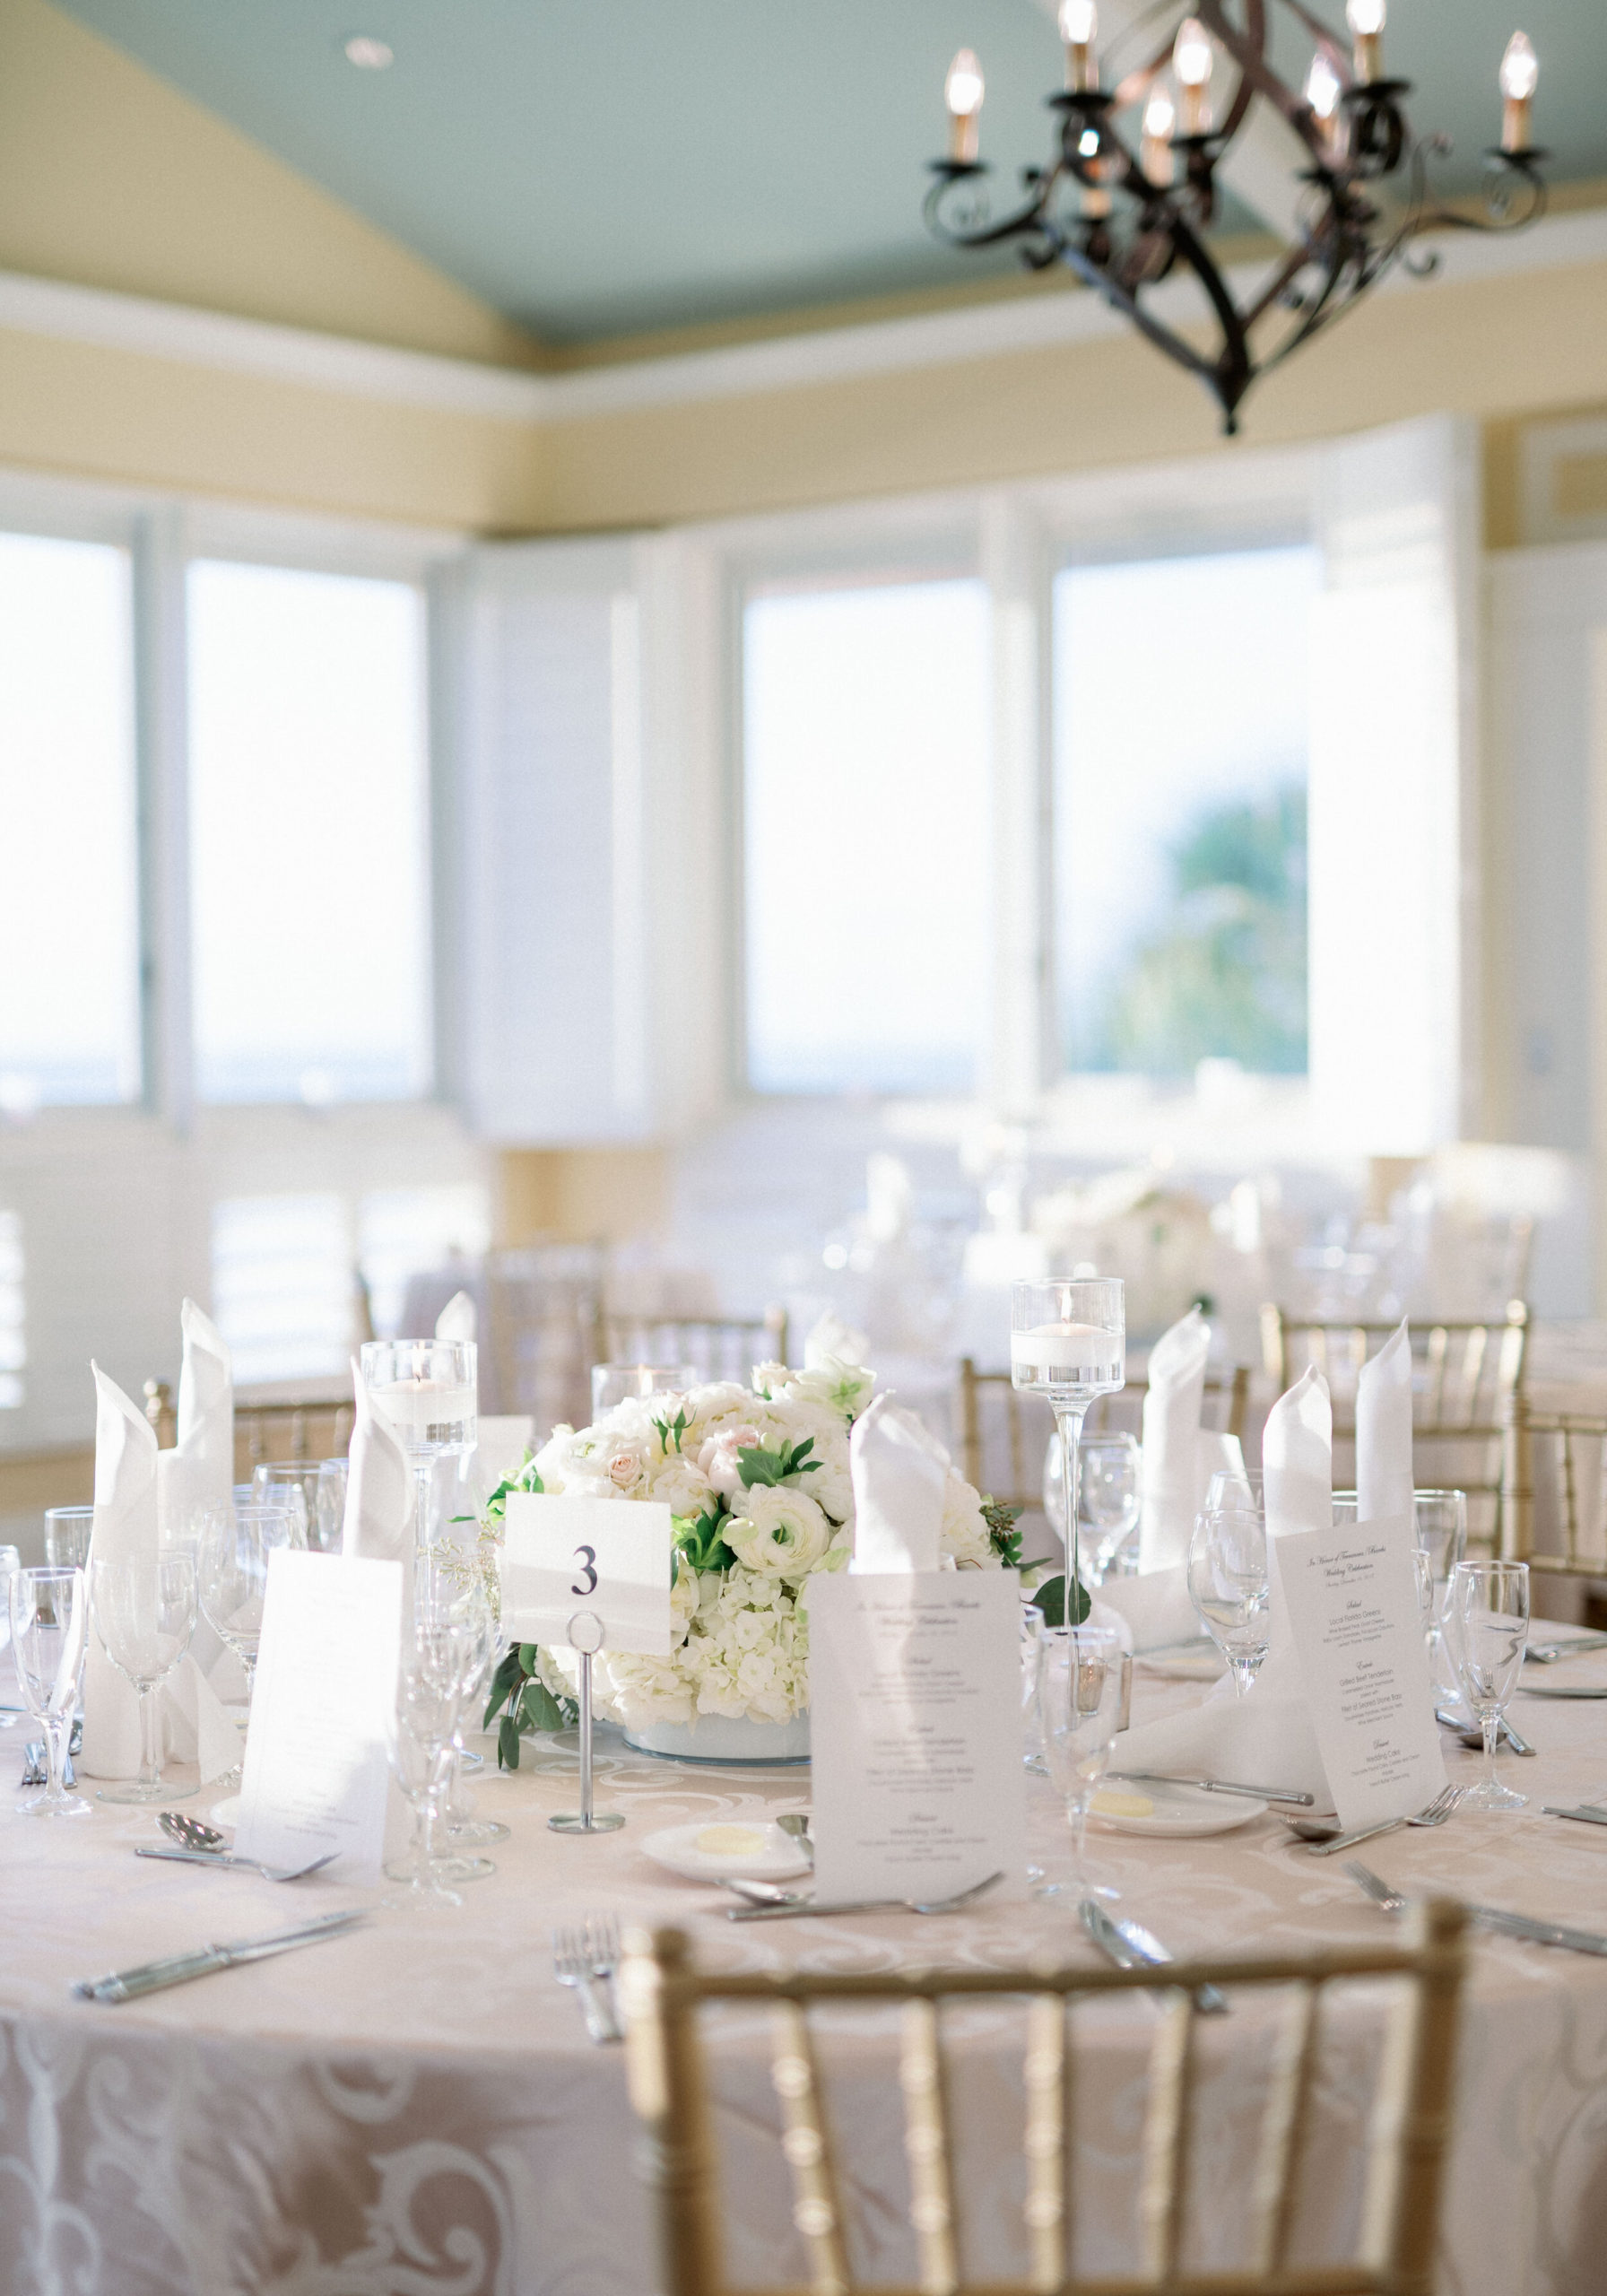 Reception in the beach house